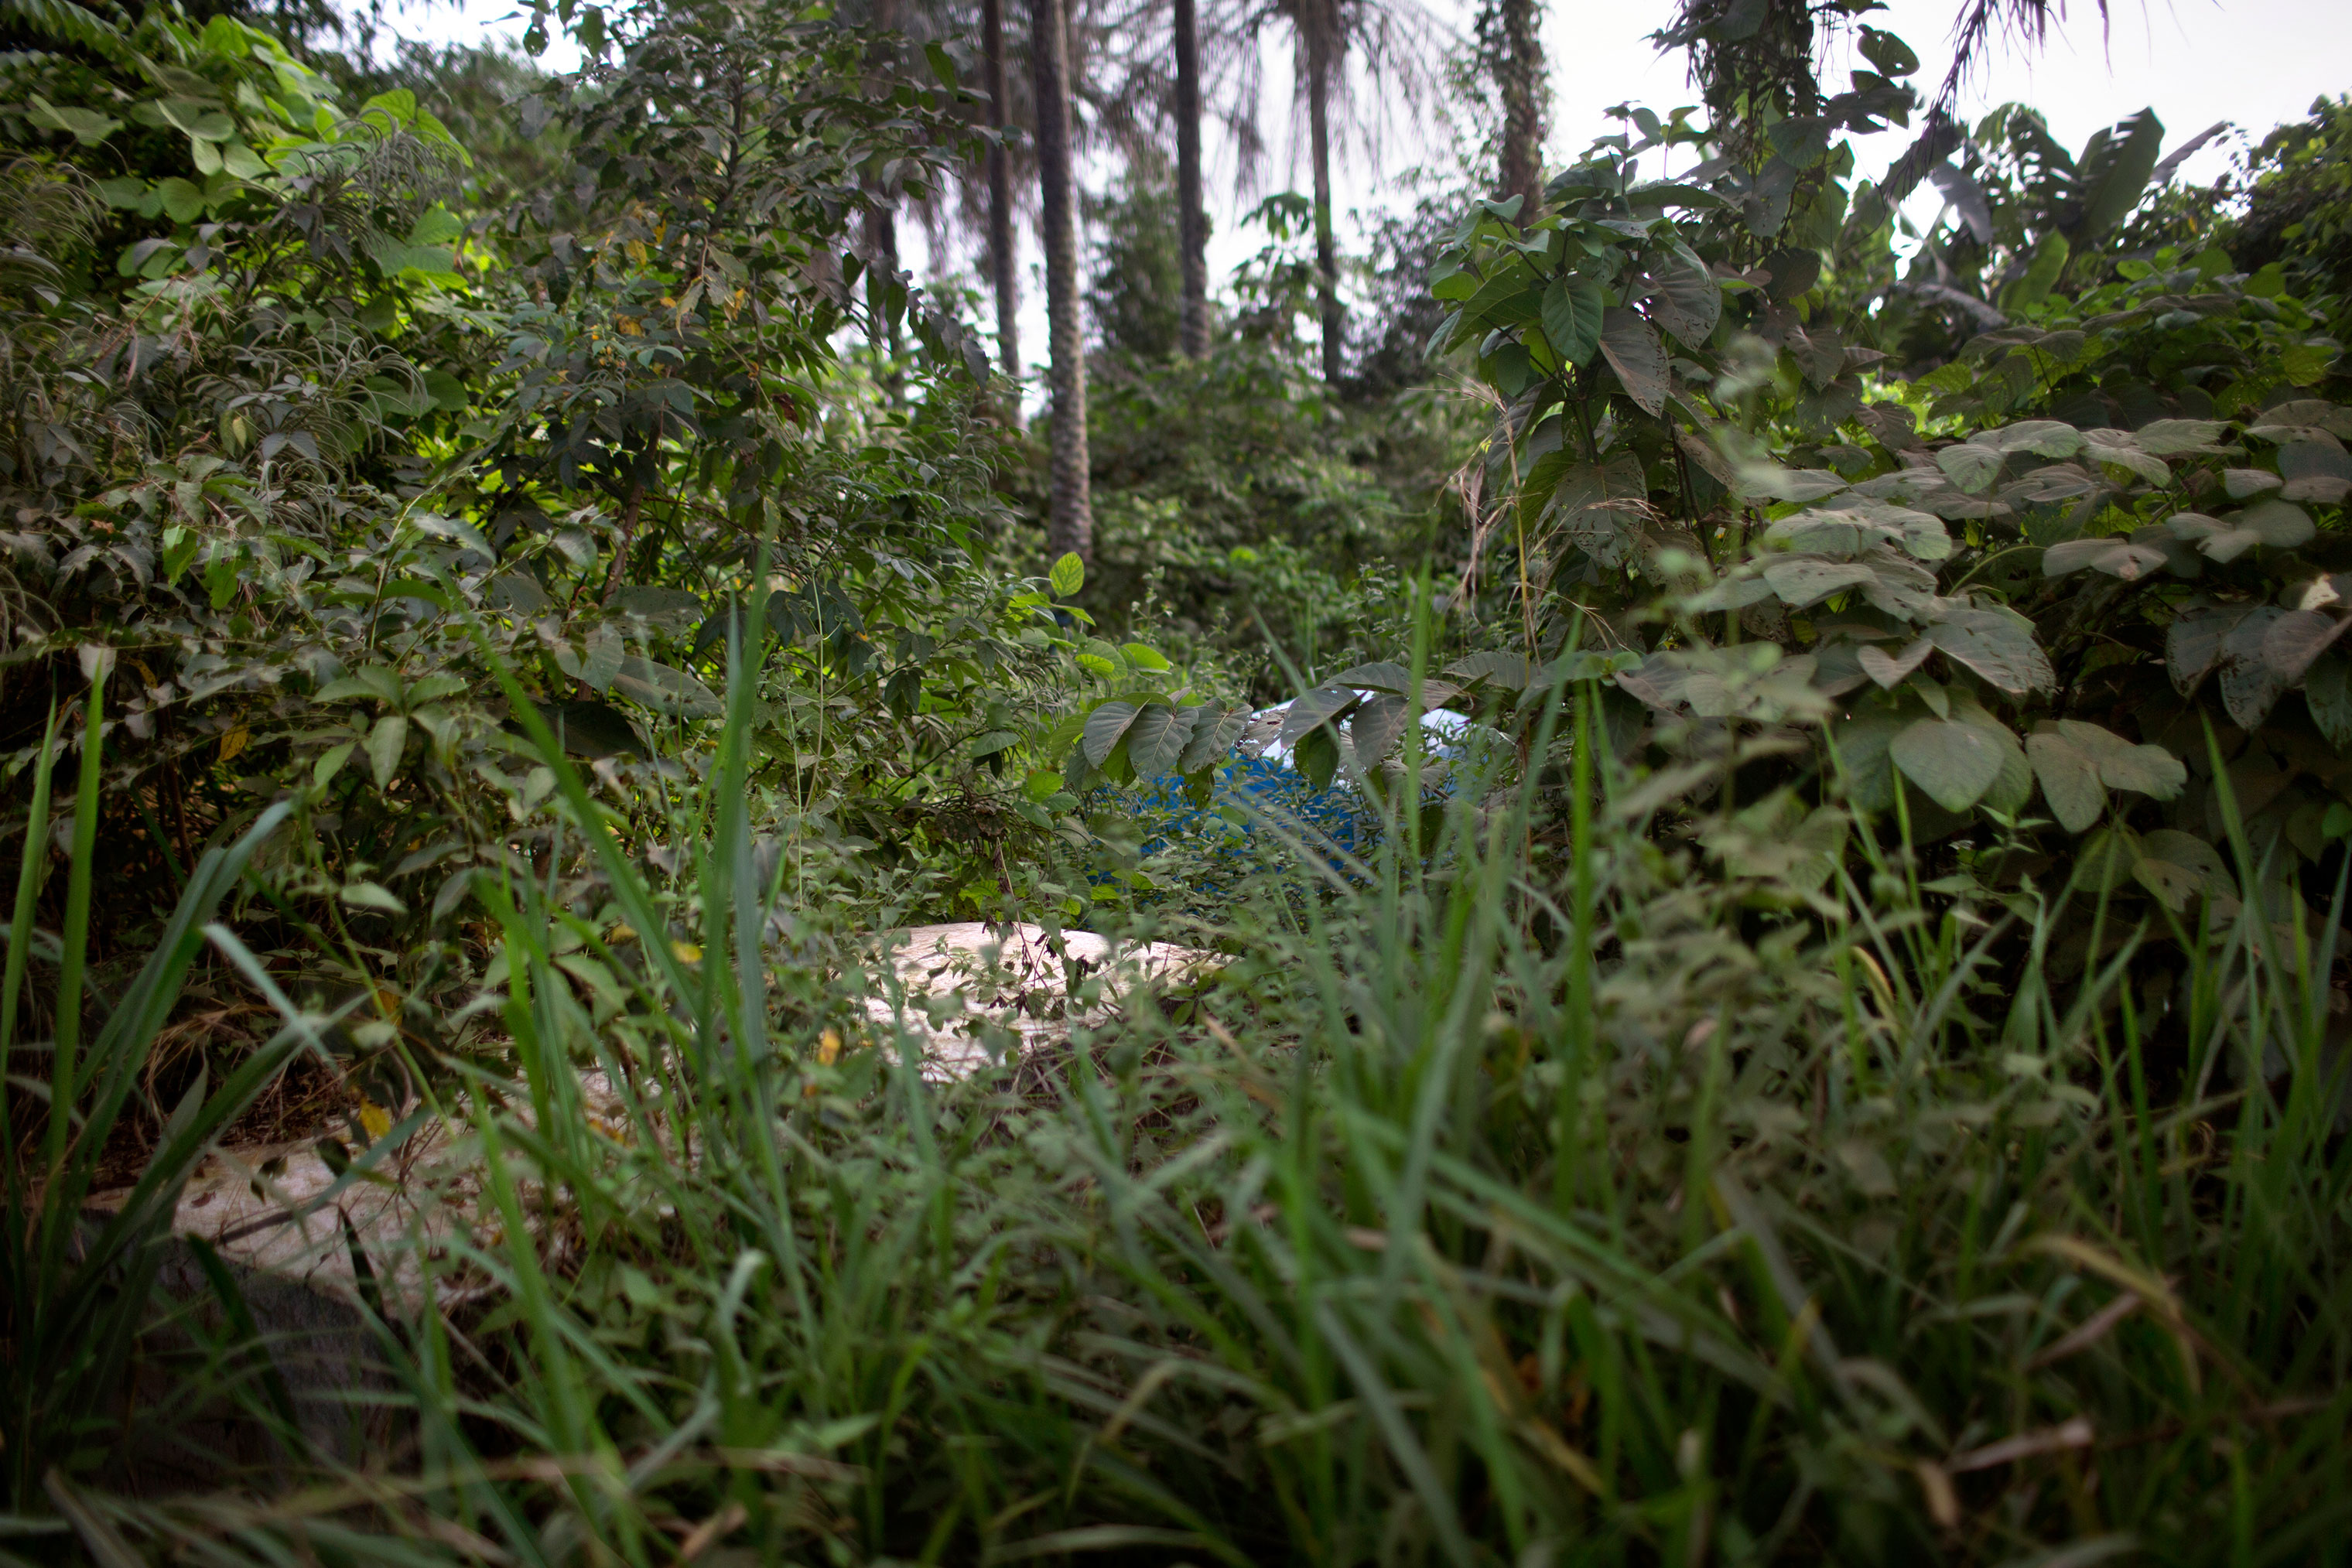 The overgrown graveyard where Johnson was buried in an unmarked grave. (Kathleen Flynn, special to ProPublica)